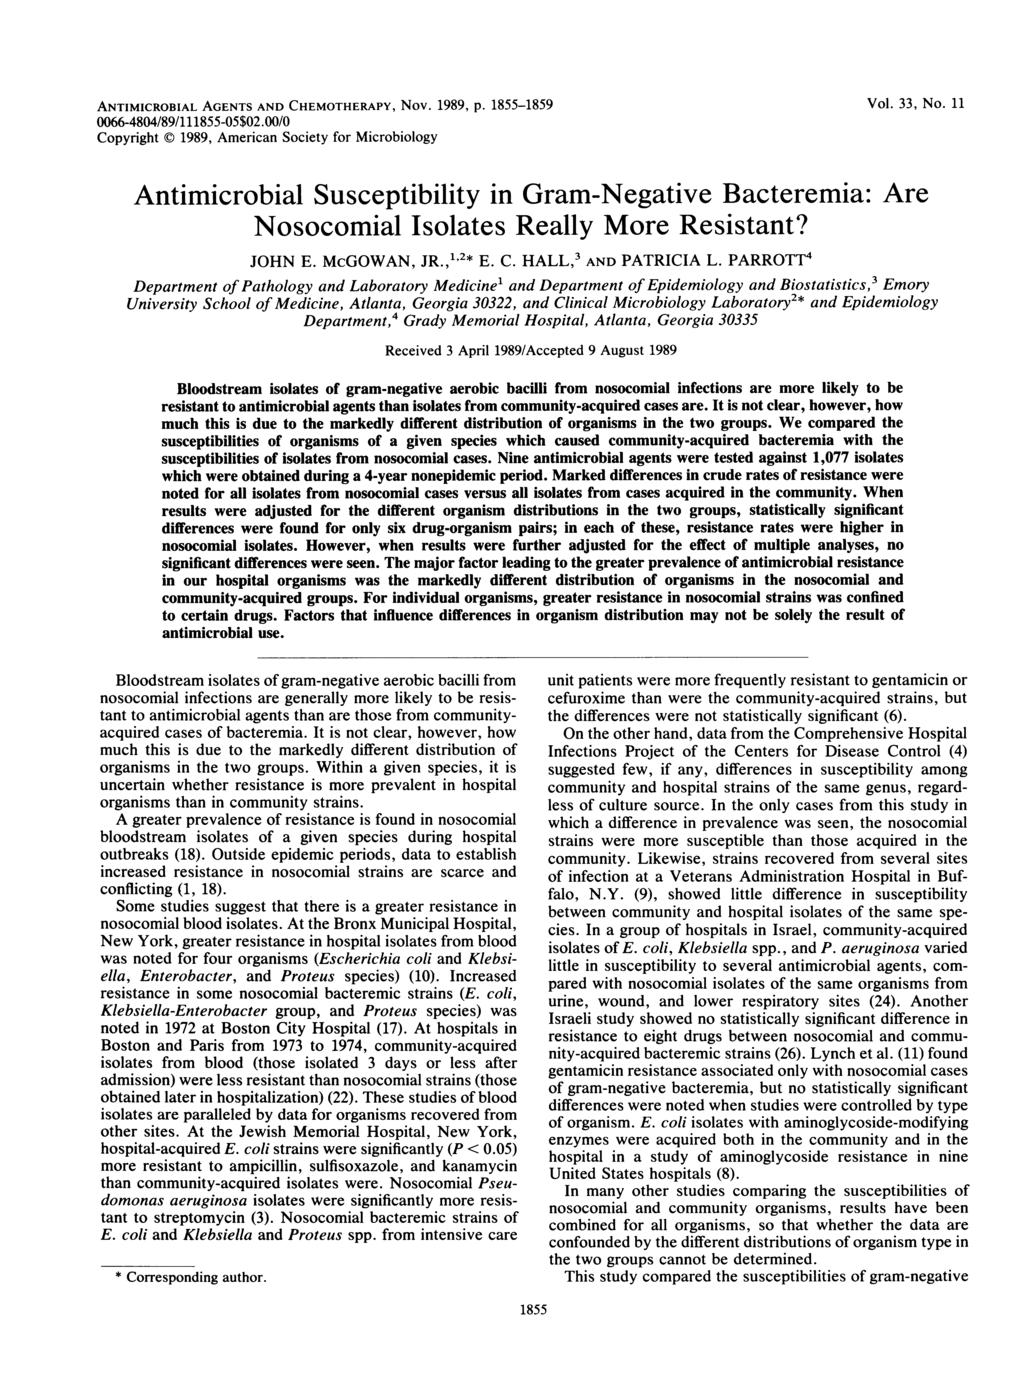 ANTIMICROBIAL AGENTS AND CHEMOTHERAPY, Nov. 1989, p. 1855-1859 0066-4804/89/111855-05$02.00/0 Copyright 1989, American Society for Microbiology Vol. 33, No.